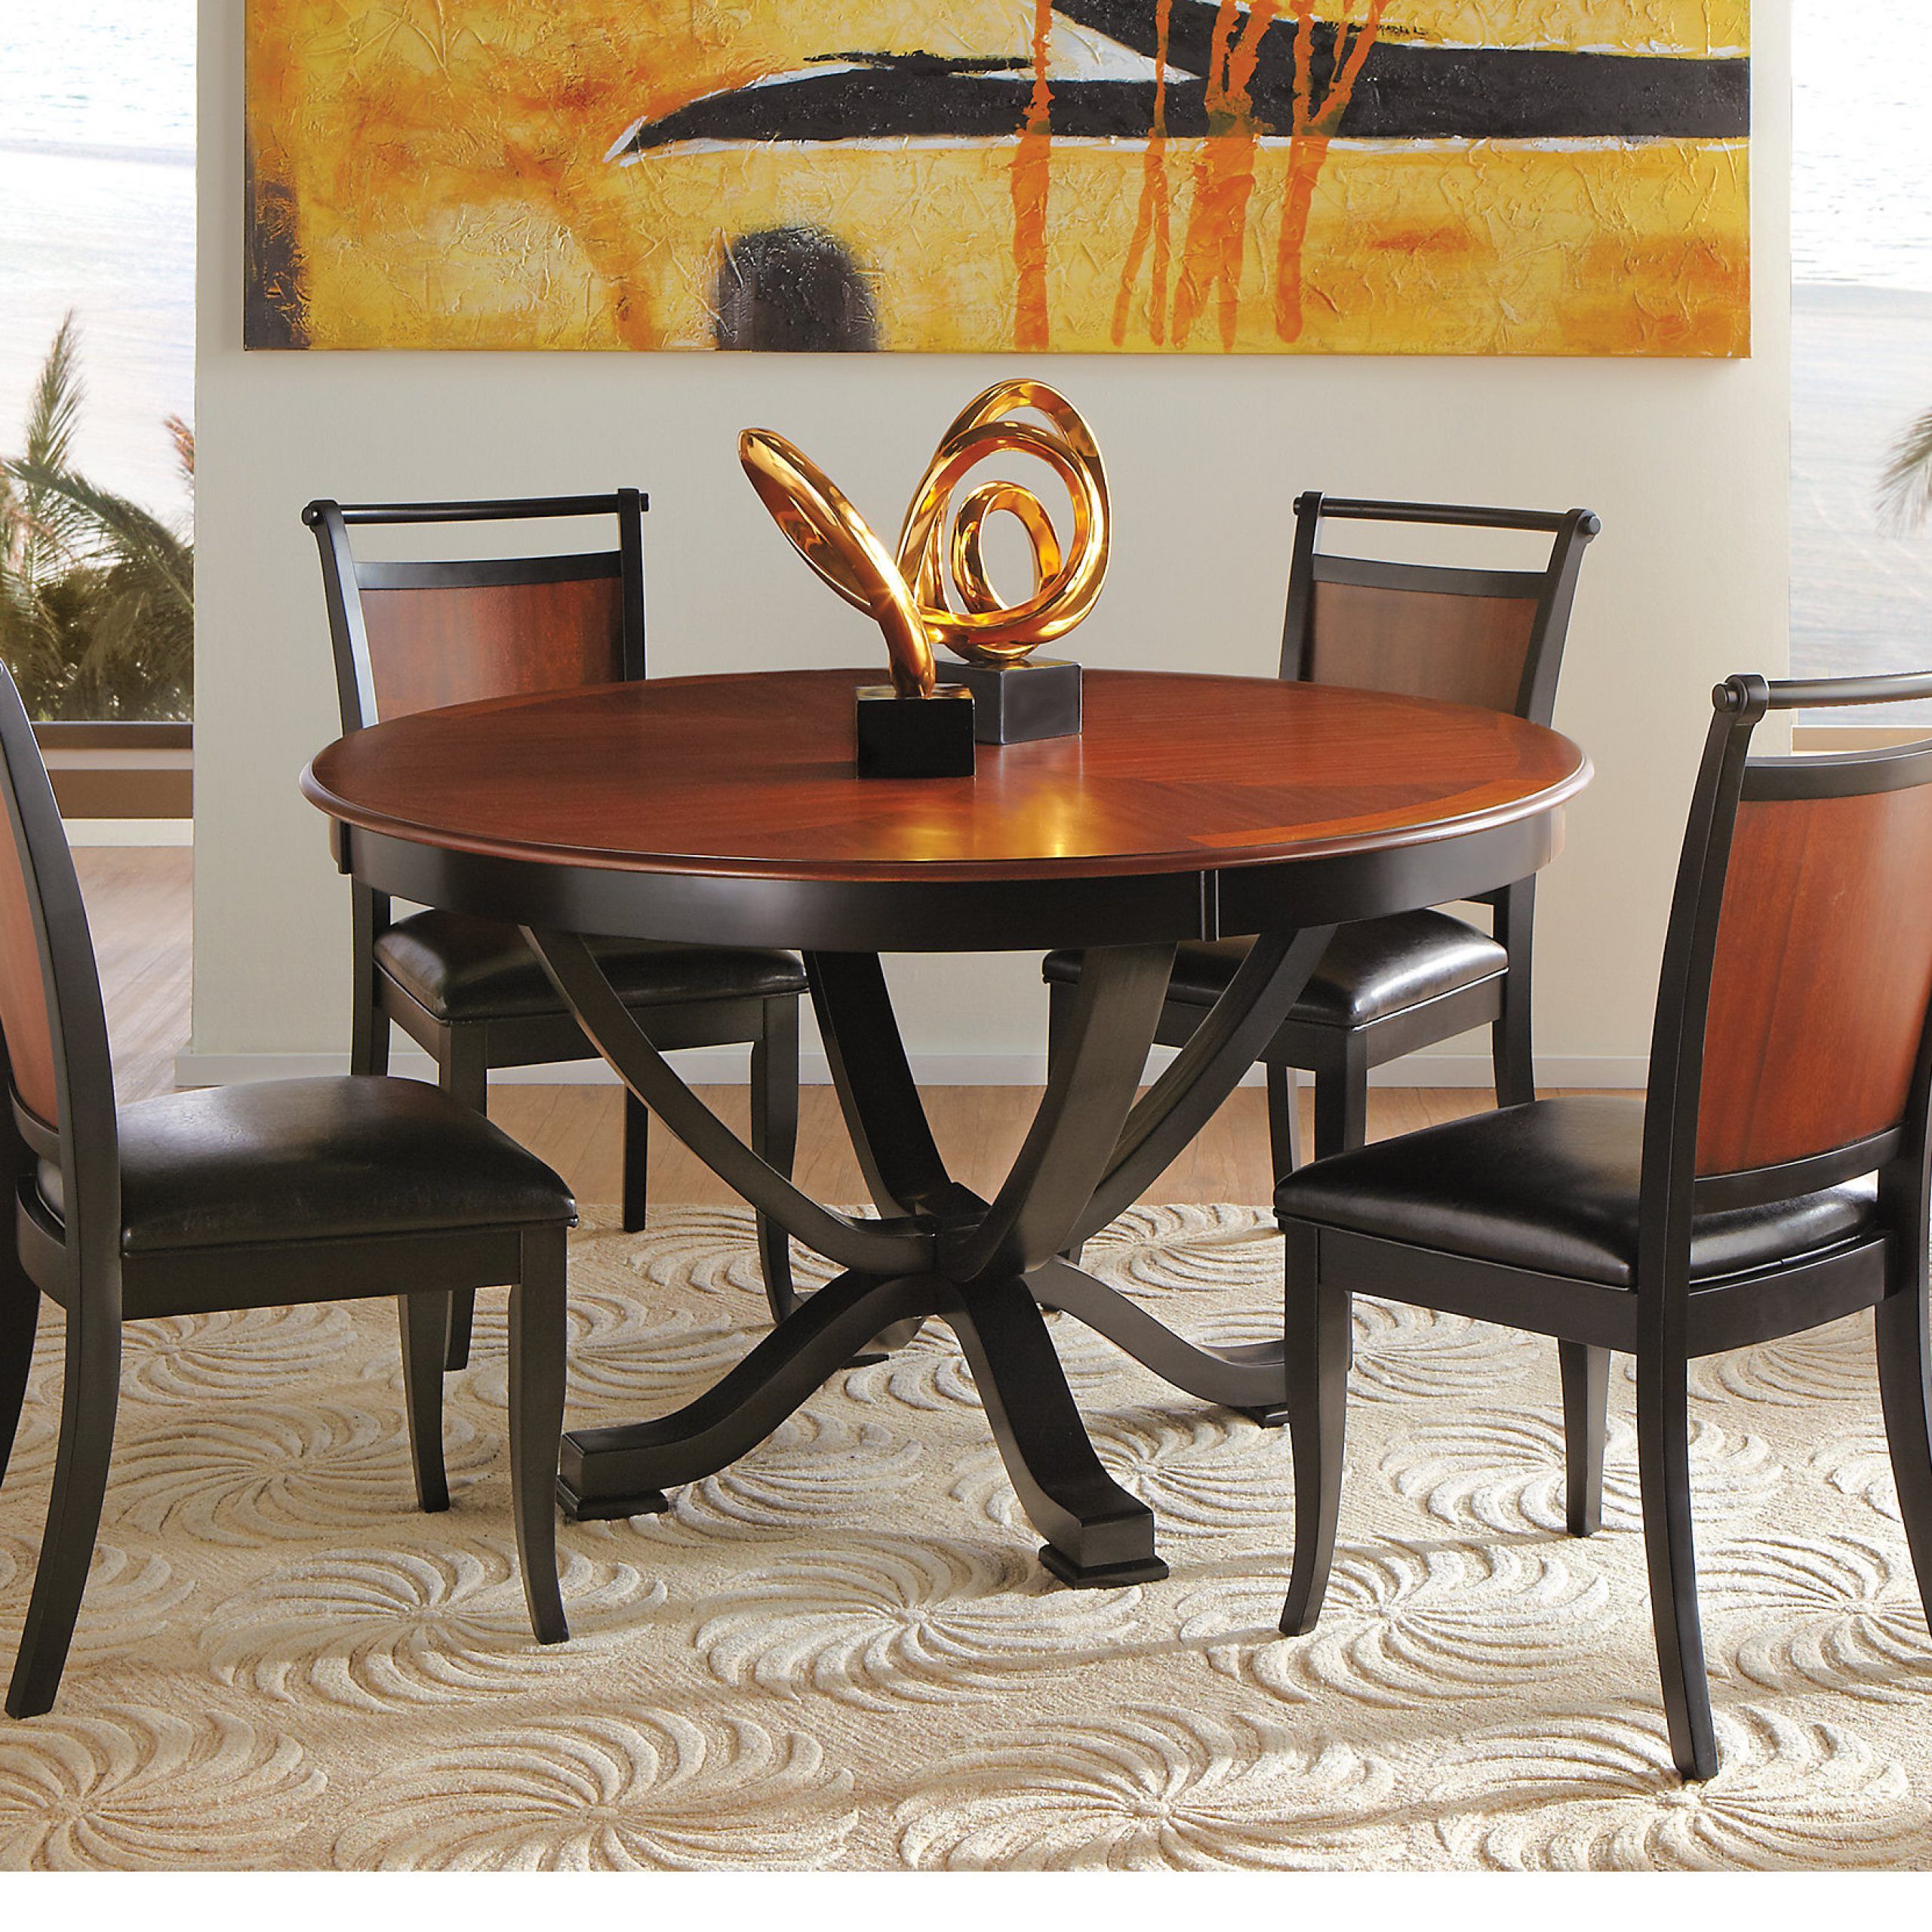 Orland Park Black 5 Pc Round Dining Set – Contemporary Within Most Popular Black Weave Outdoor Modern Dining Chairs Sets (View 13 of 15)